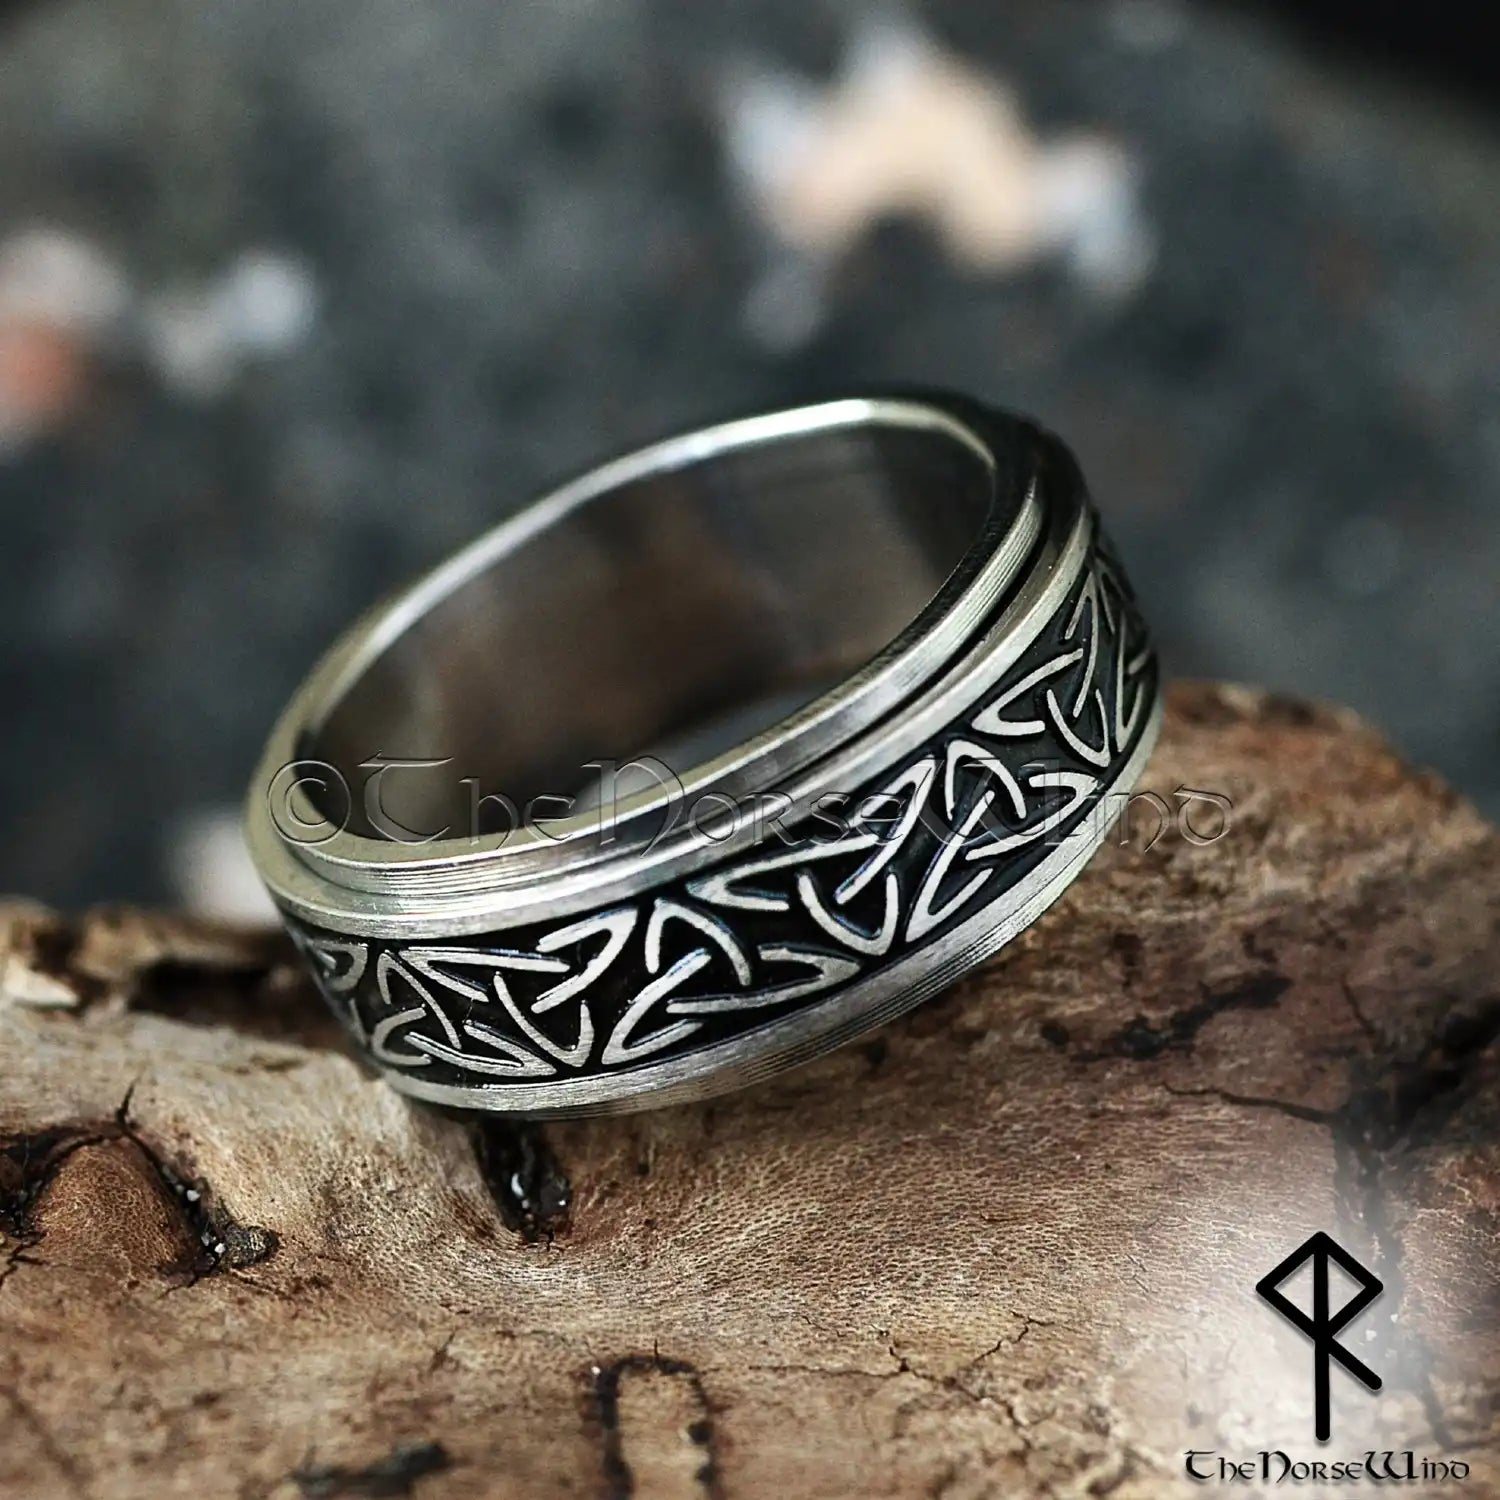 Trinity Knot Celtic Triquetra Band Ring - Stainless Steel